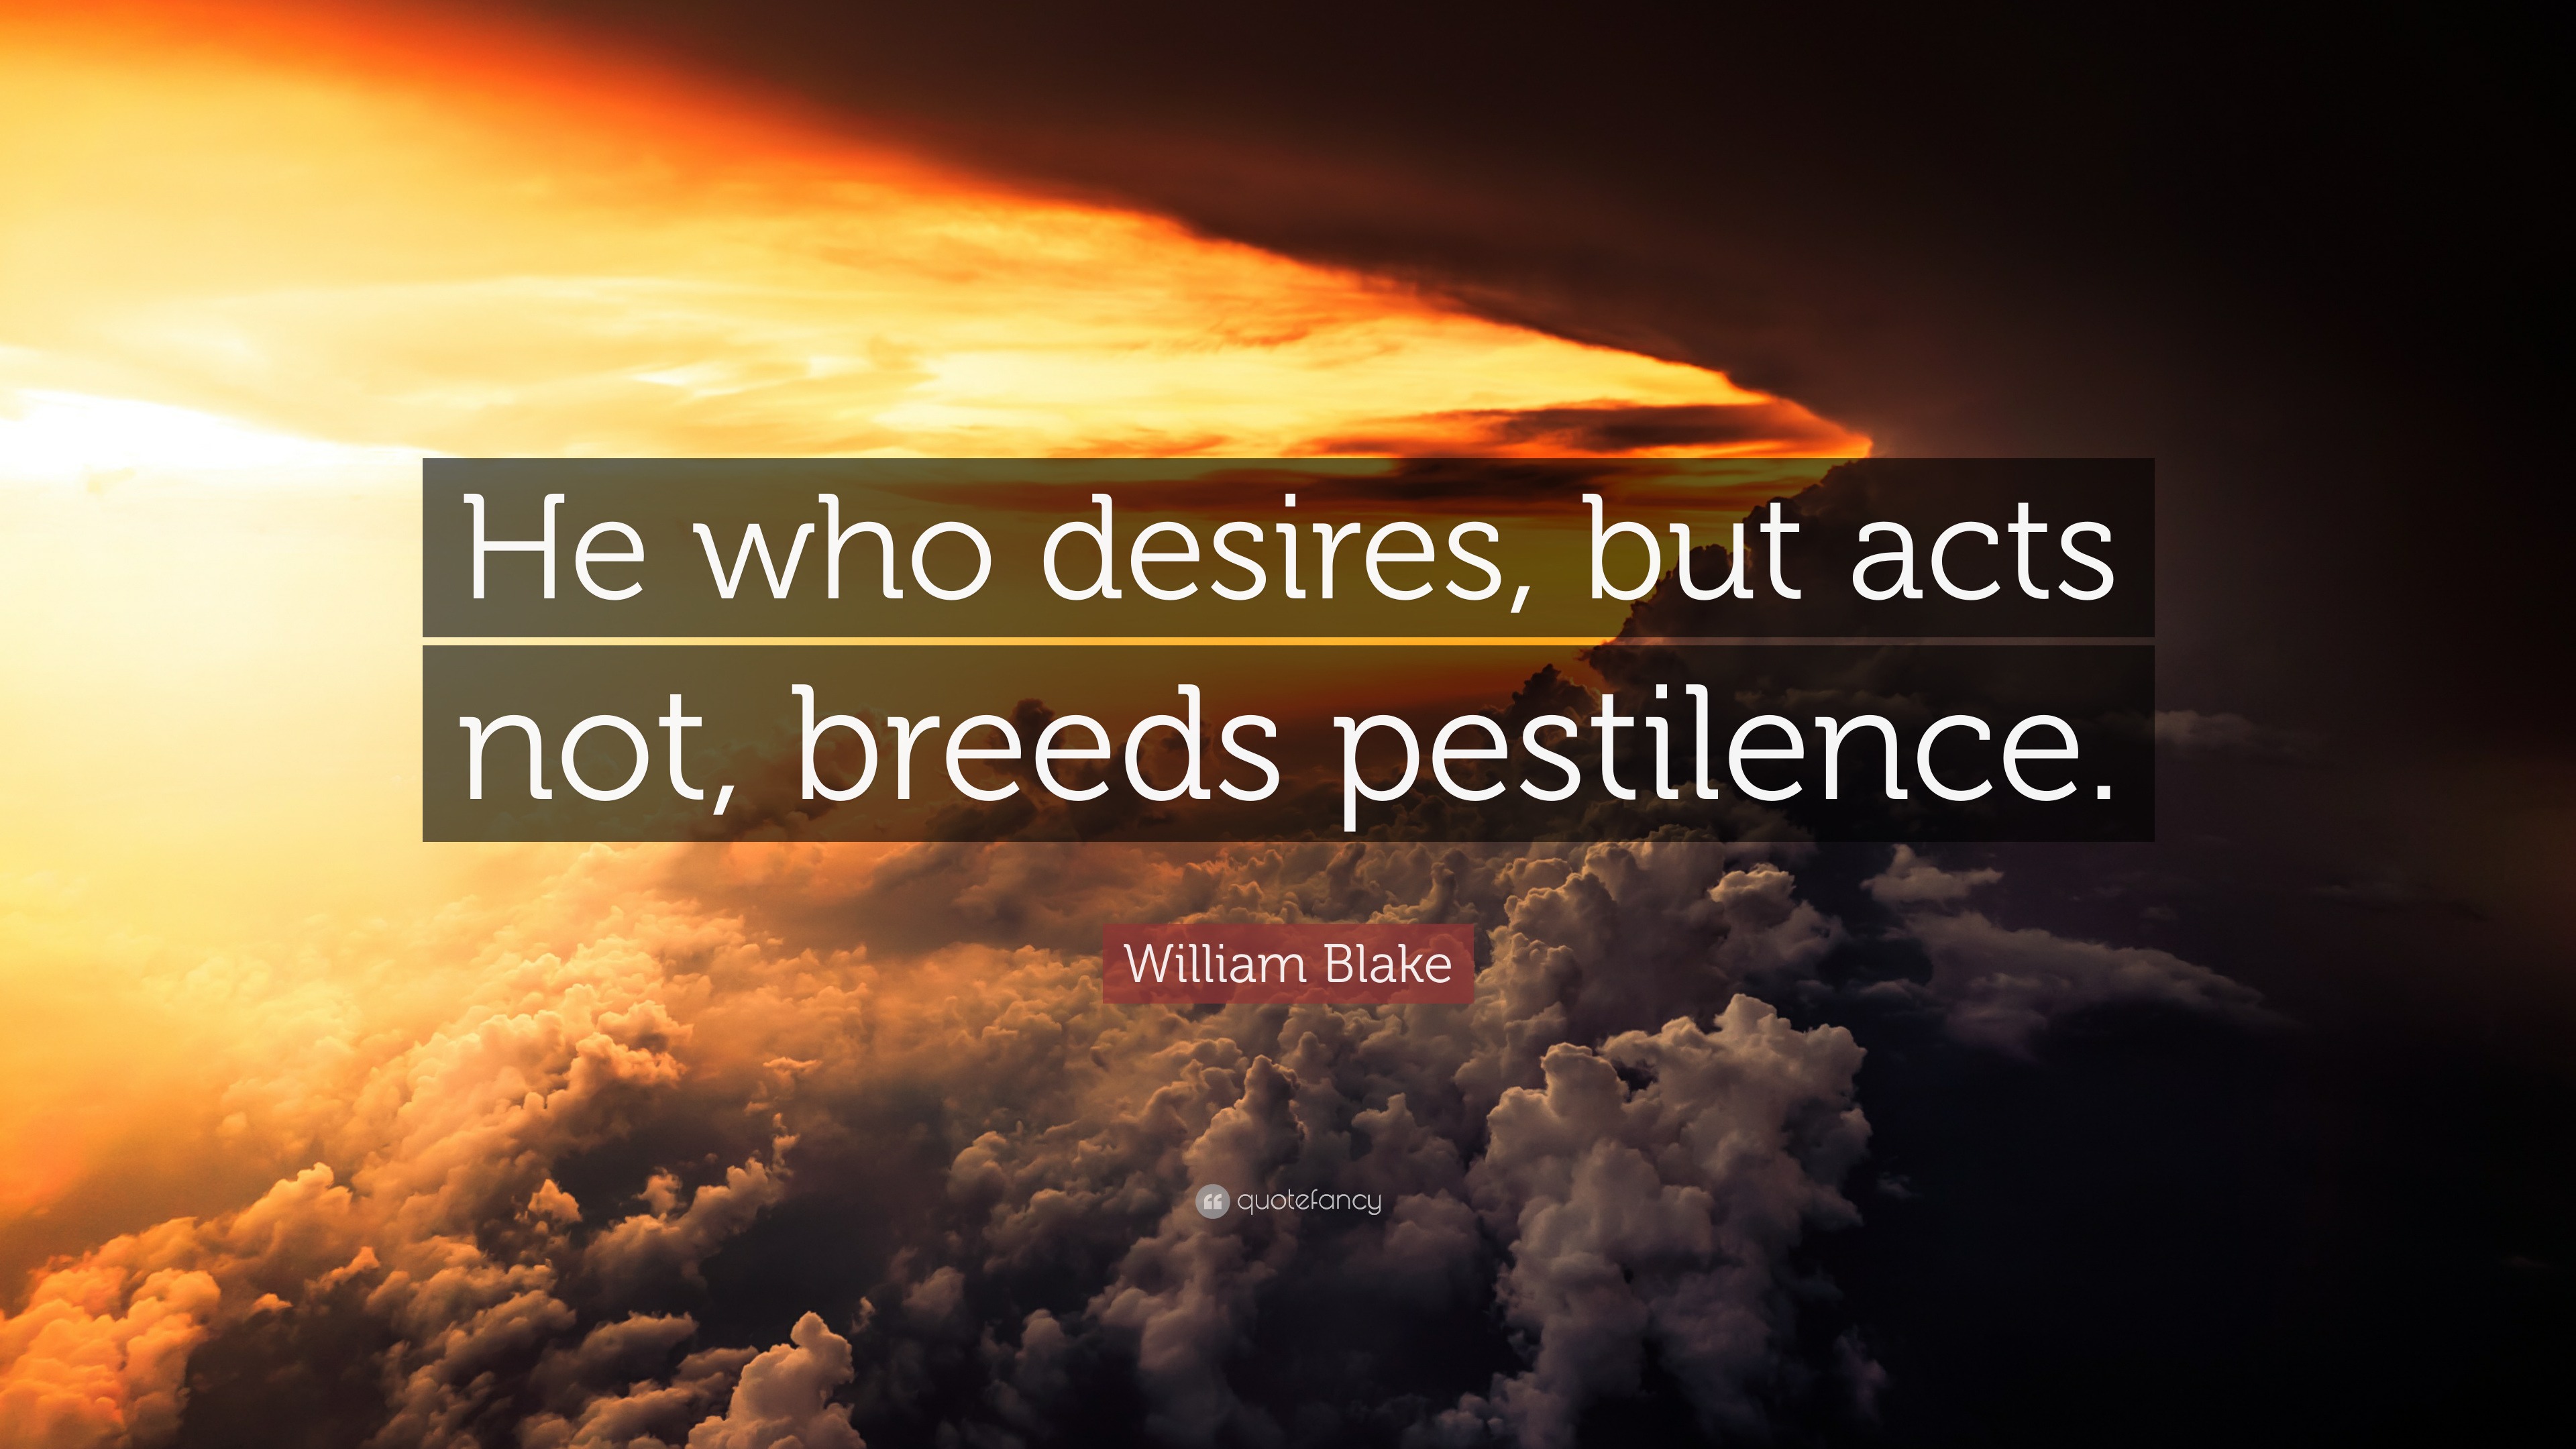 2113170 William Blake Quote He who desires but acts not breeds pestilence